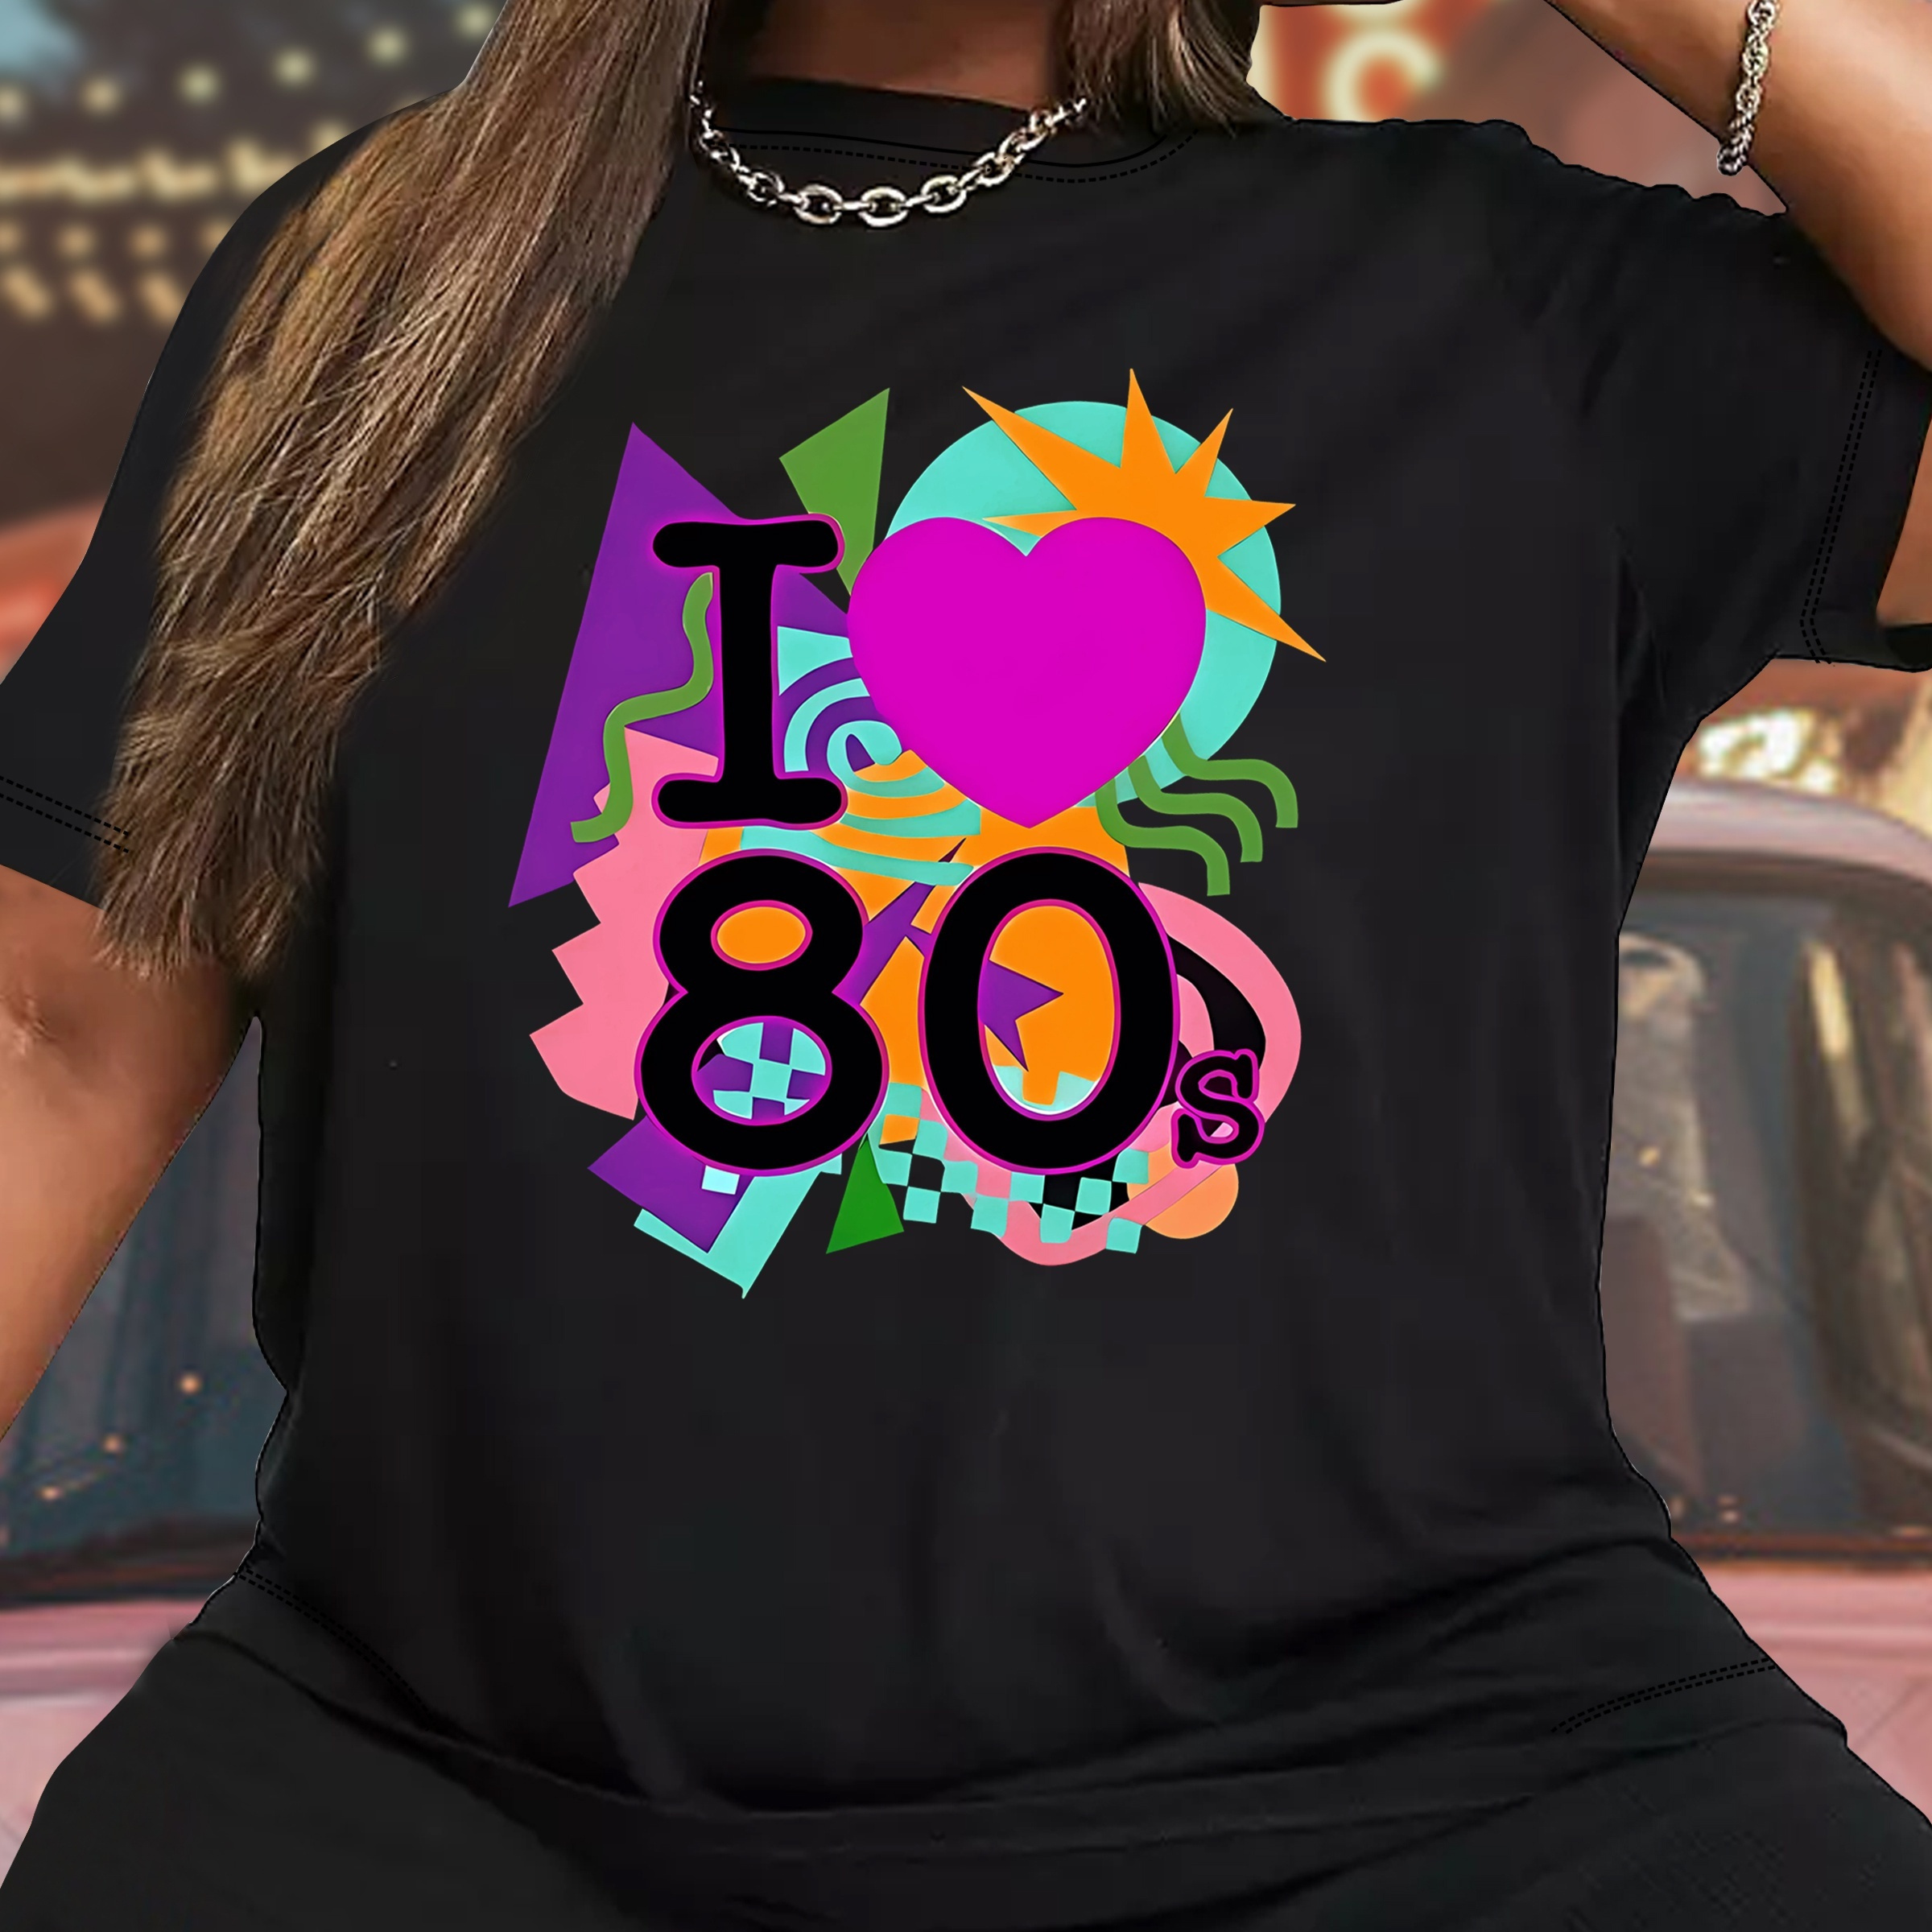 

Women's Plus Size Casual Sporty Tee With I Love 80s Heart Graffiti Print, Fashion Short Sleeve T-shirt, Retro 80s Style